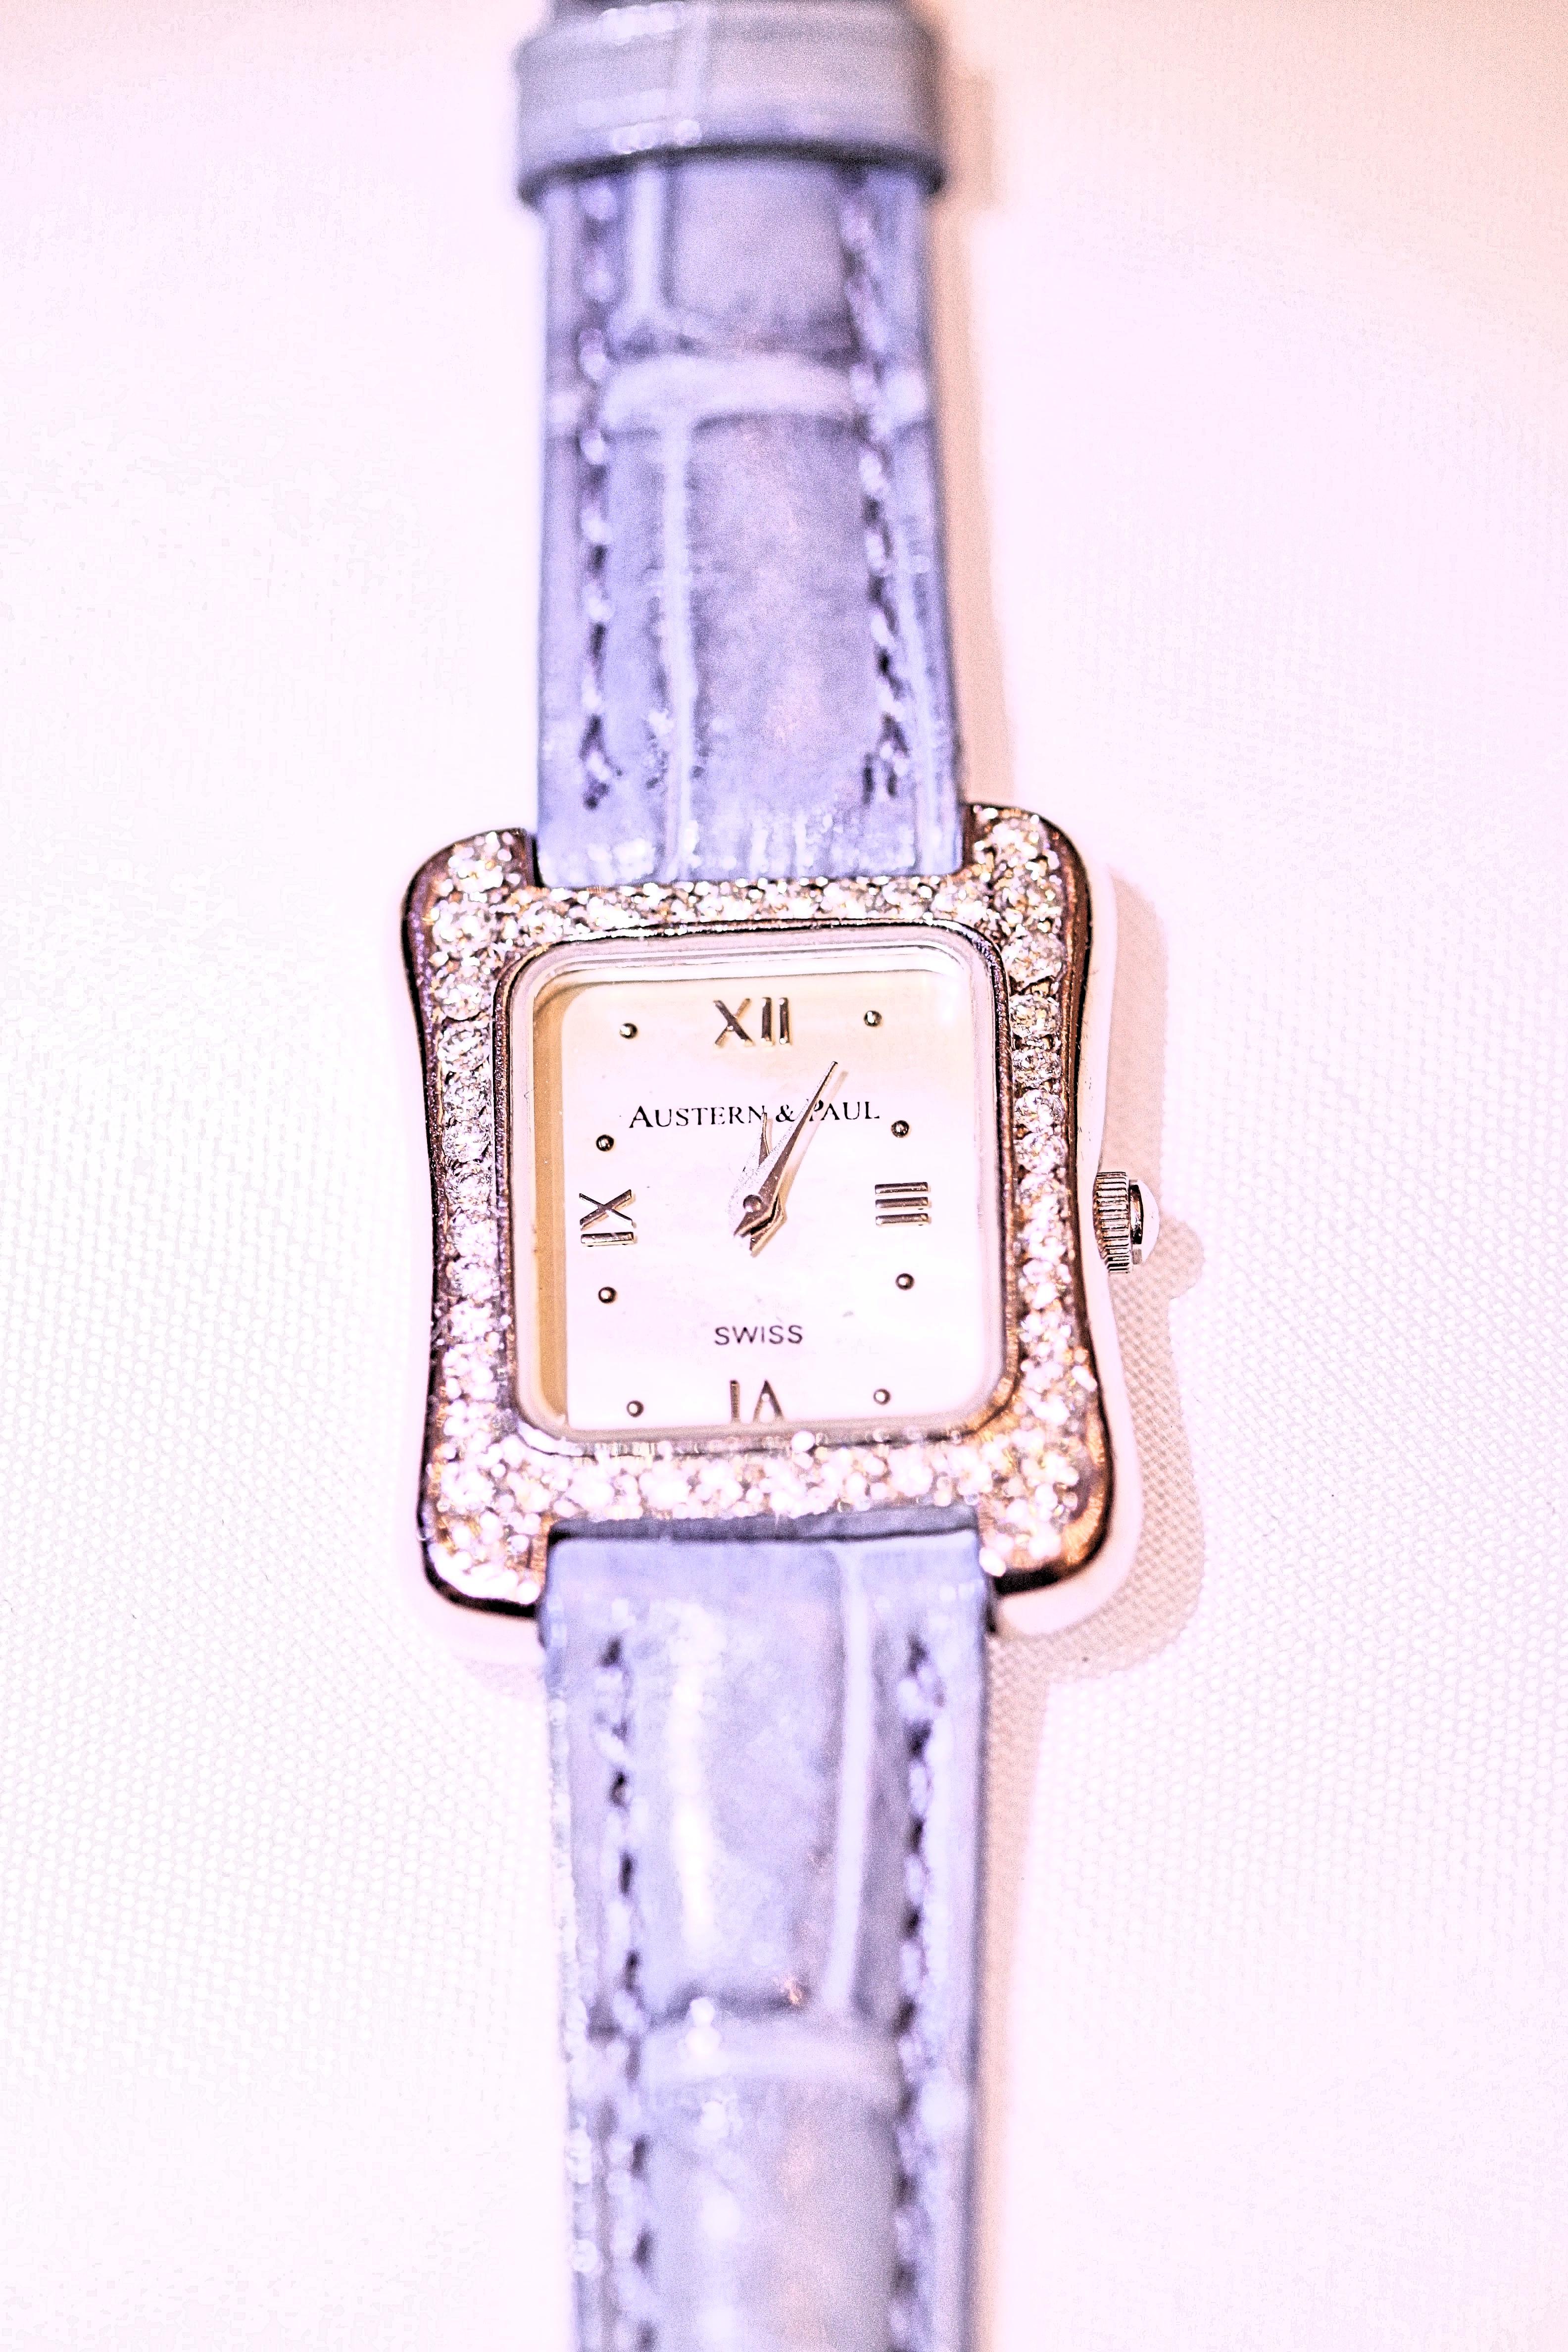 A charming 14 karat white gold ladies tank watch.  The watch has .45 carat total weight of round brilliant cut diamonds.  The watch is a quartz with a mother of pearl dial.  The watch measures 26 x 20 mm.  The leather strap is a blue alligator with